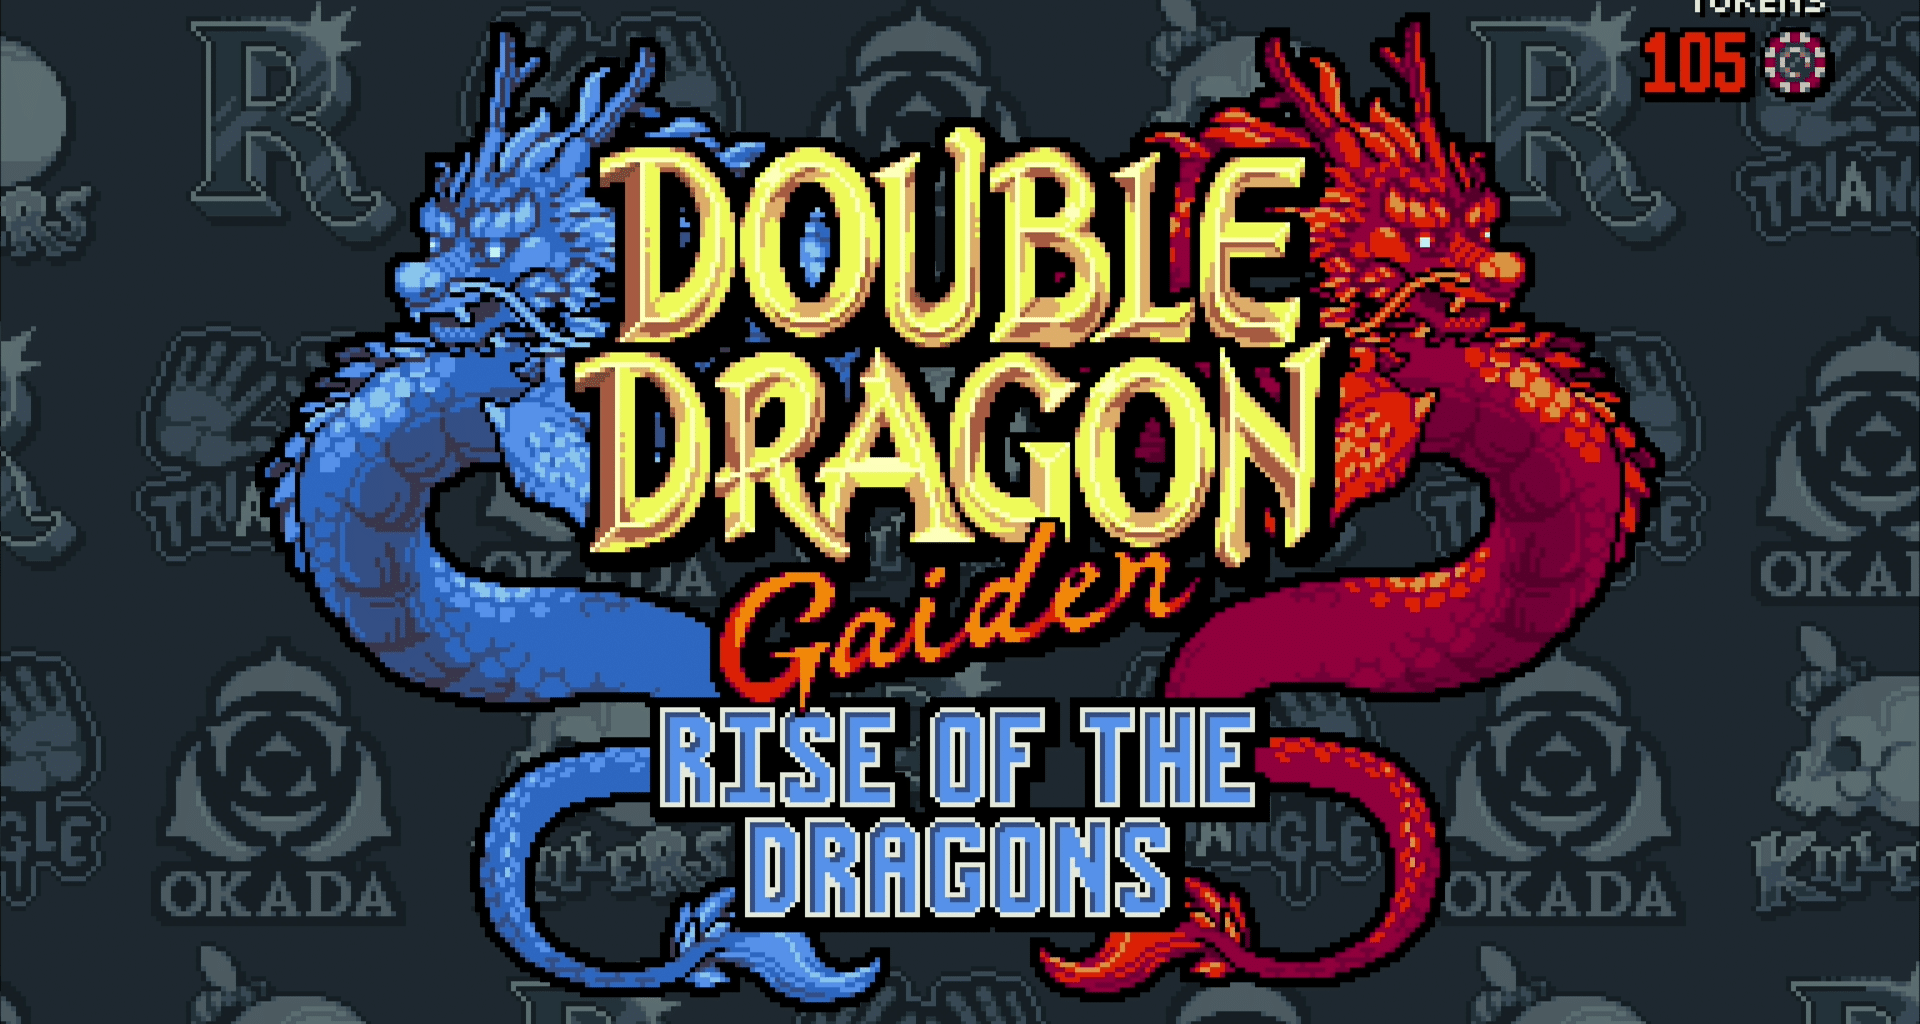 Double Dragon Gaiden: Rise of the Dragons 23423